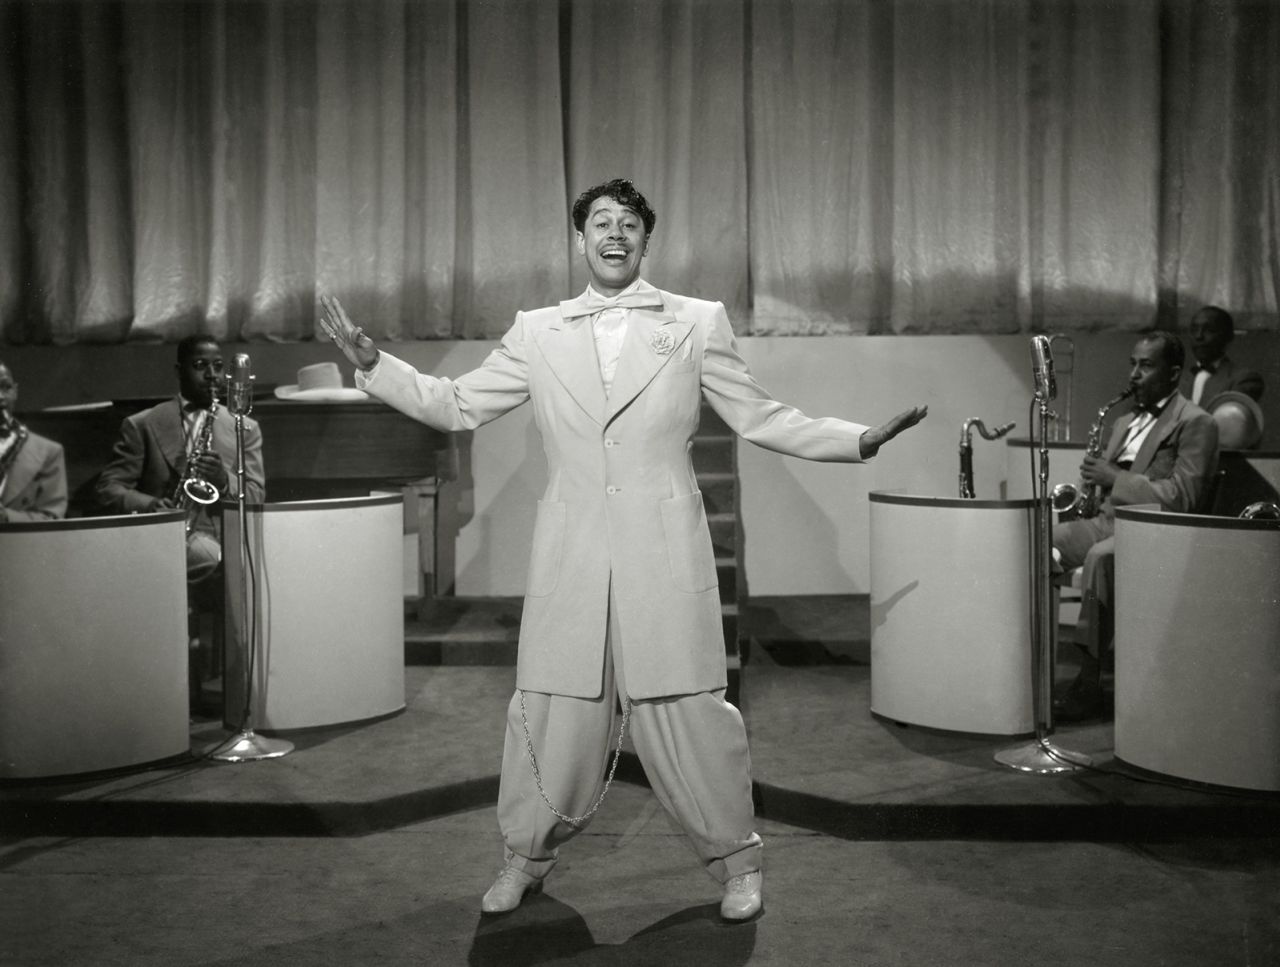 Cab Calloway performs in the 1943 movie "Stormy Weather," wearing a supersized zoot suit — a knee-length coat jacket, bow tie and billowing wide-leg pants.